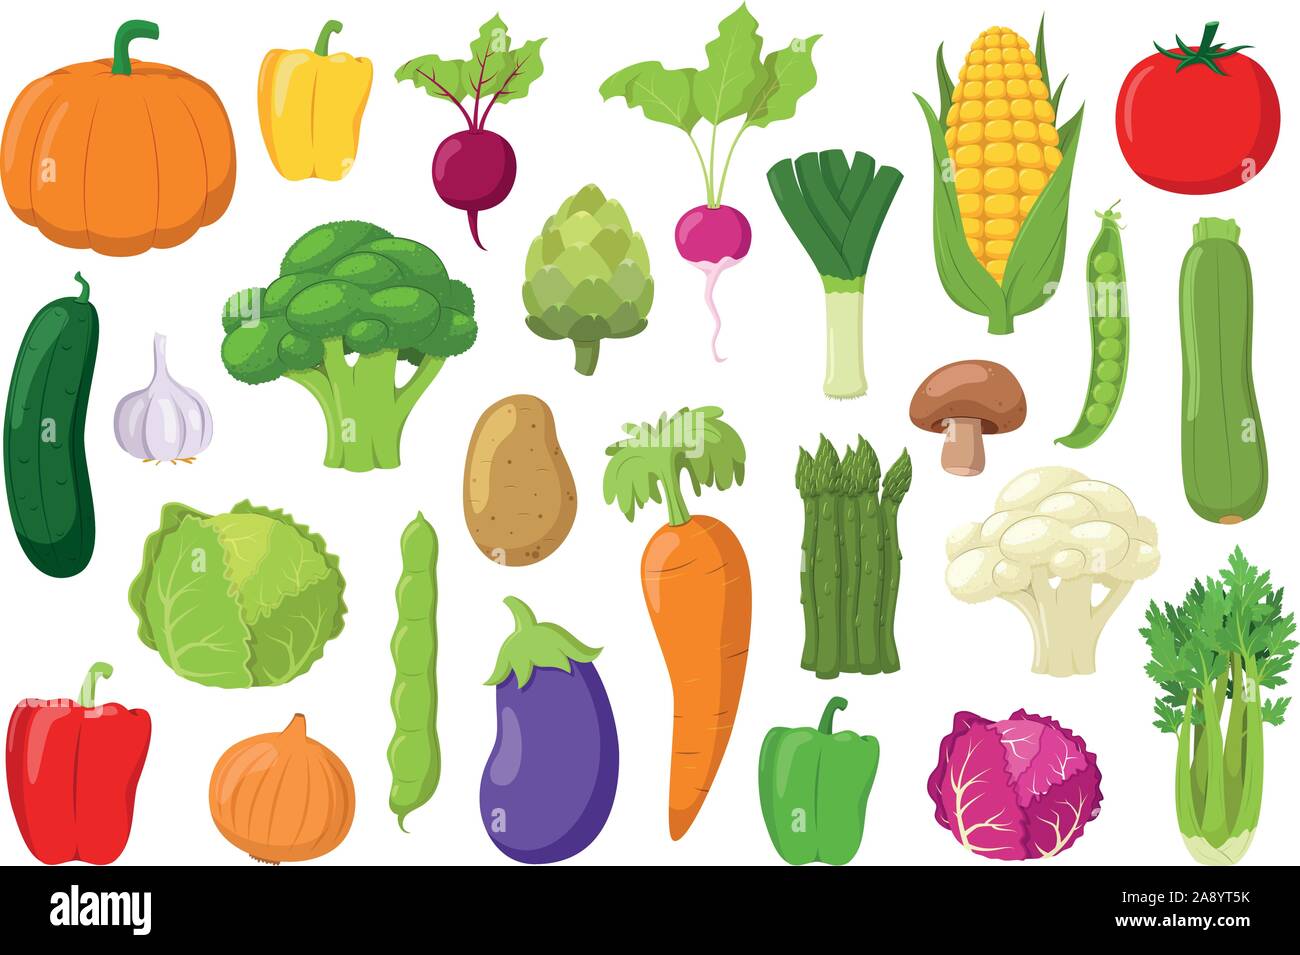 Vegetables Collection: Set of 26 different vegetables in cartoon style Vector illustration Stock Vector